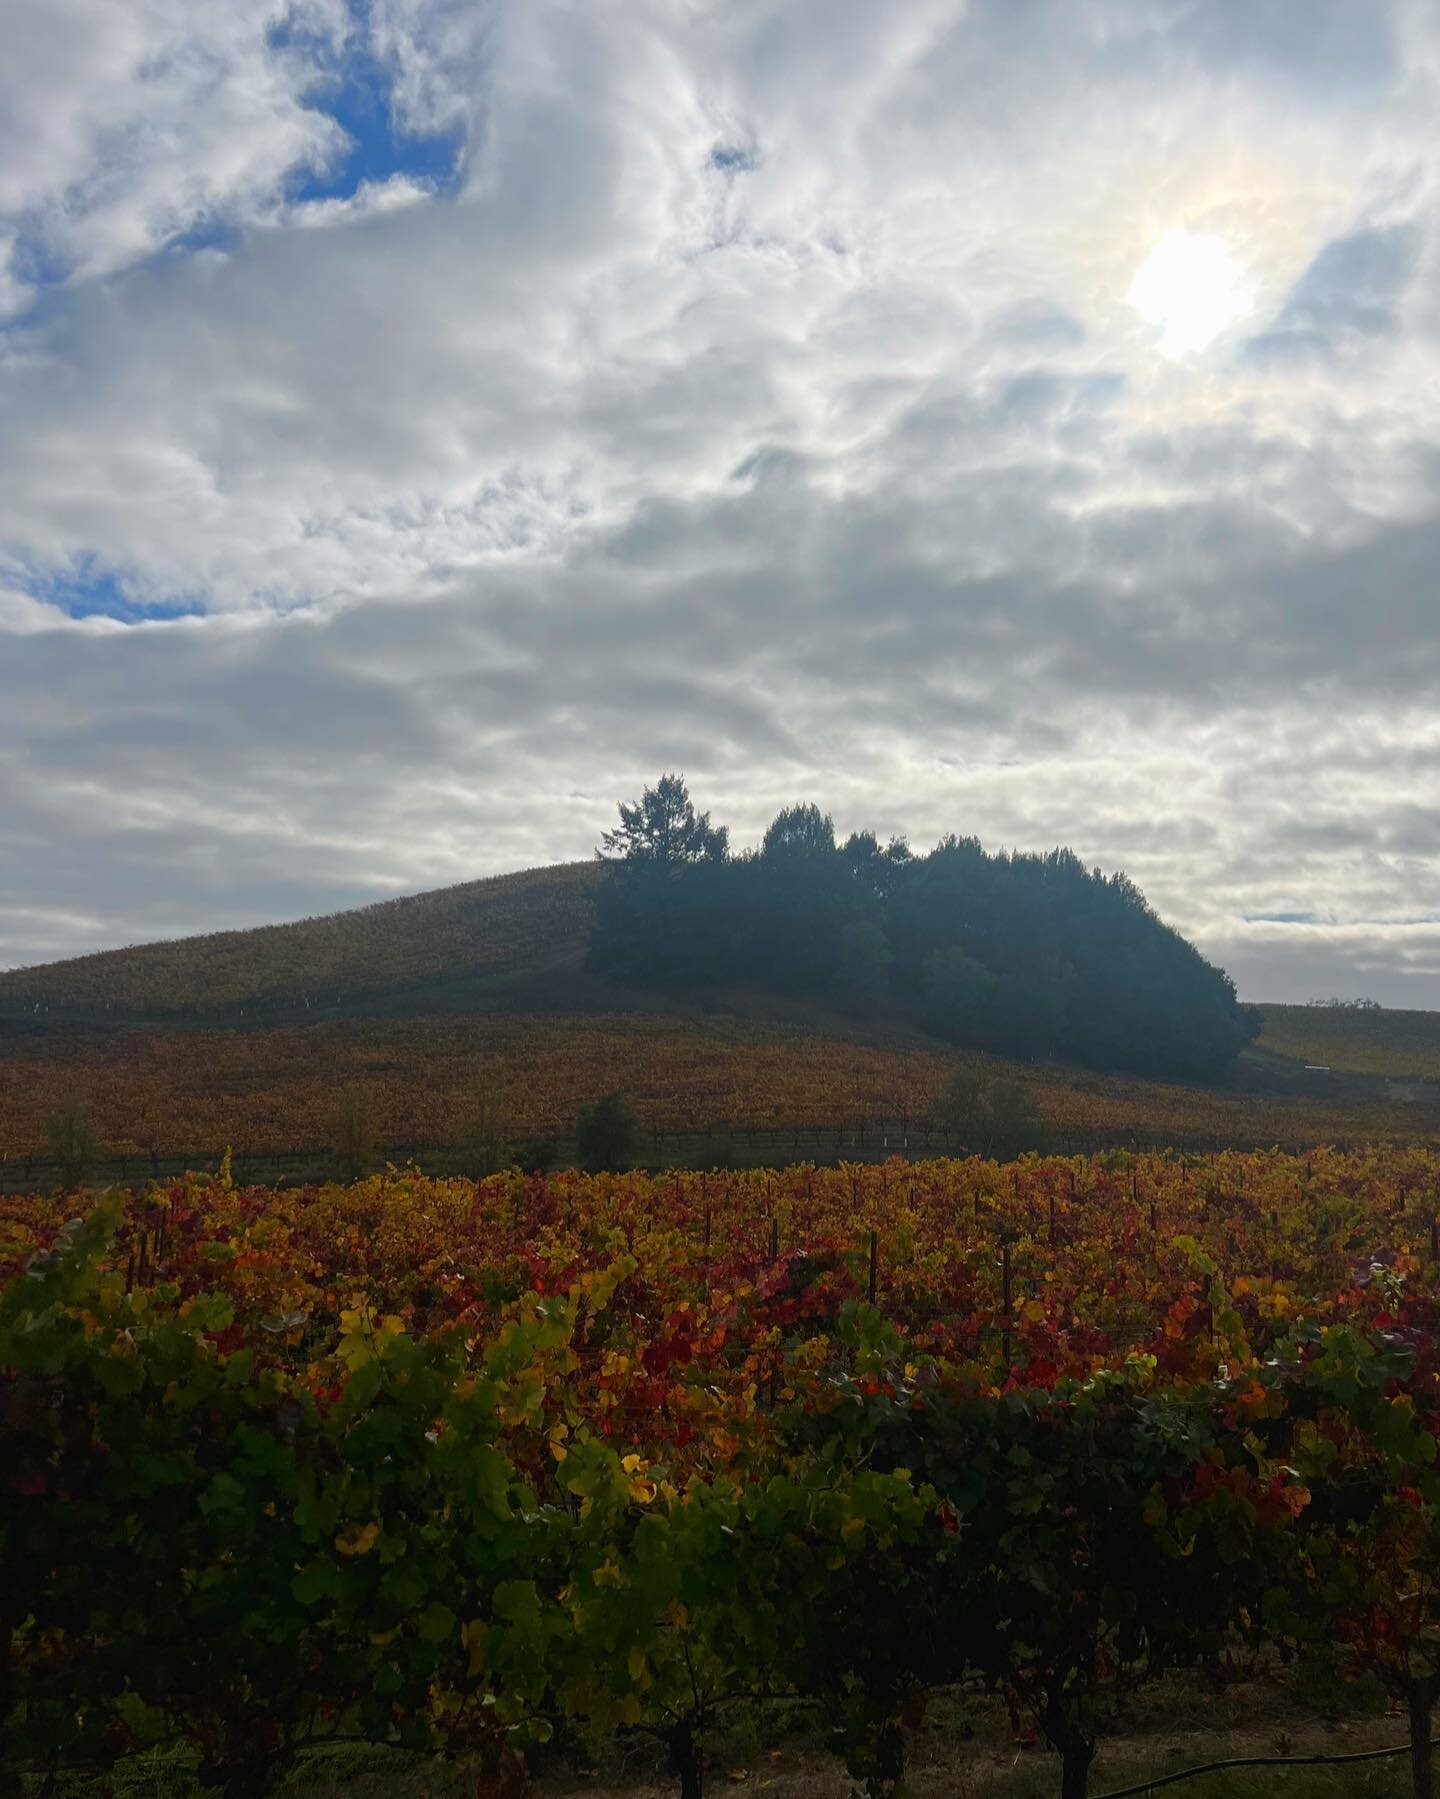 Fall is our favorite color 🍁

#russianrivervalley #sonomacounty #autumninwinecountry #fallinwinecountry #sonomacounty #russianrivervineyards #sonomacountywine #californiawinecountry #californiawinery #californiavineyards #macrostiewinery #teslatour 